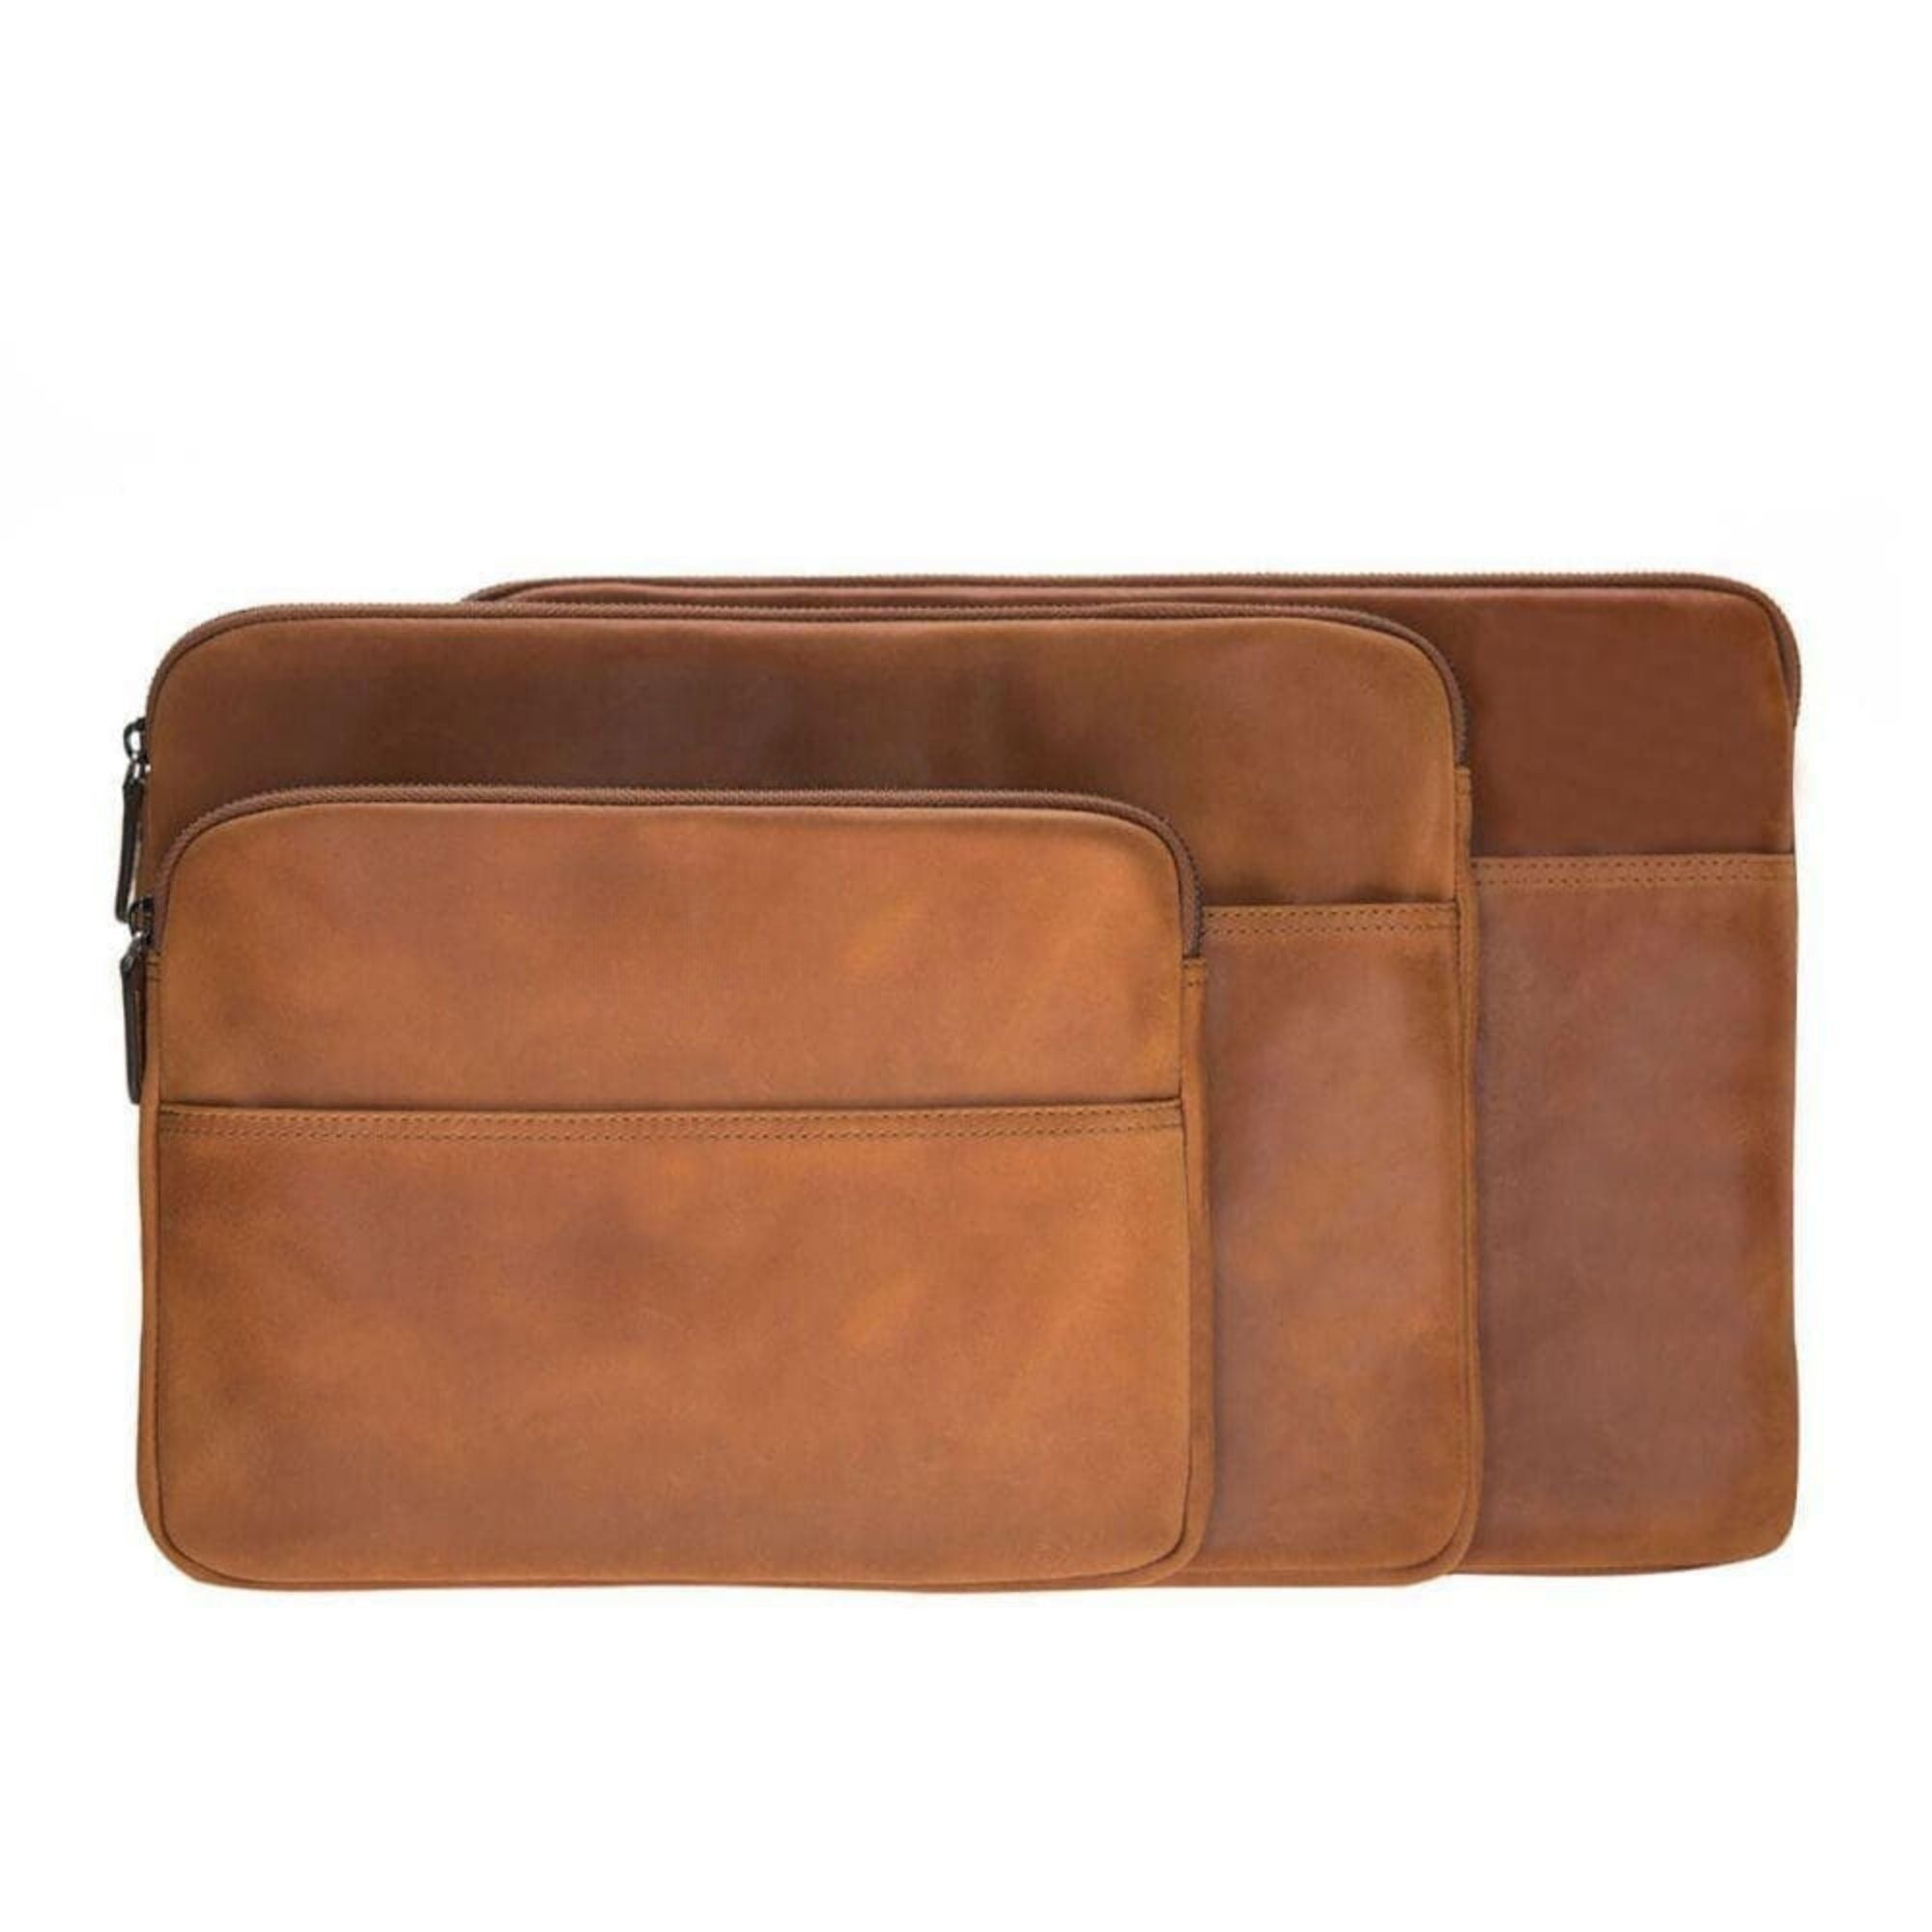 Kemmerer Leather Sleeve for iPad and MacBook - 11 Inches - Tan - TORONATA